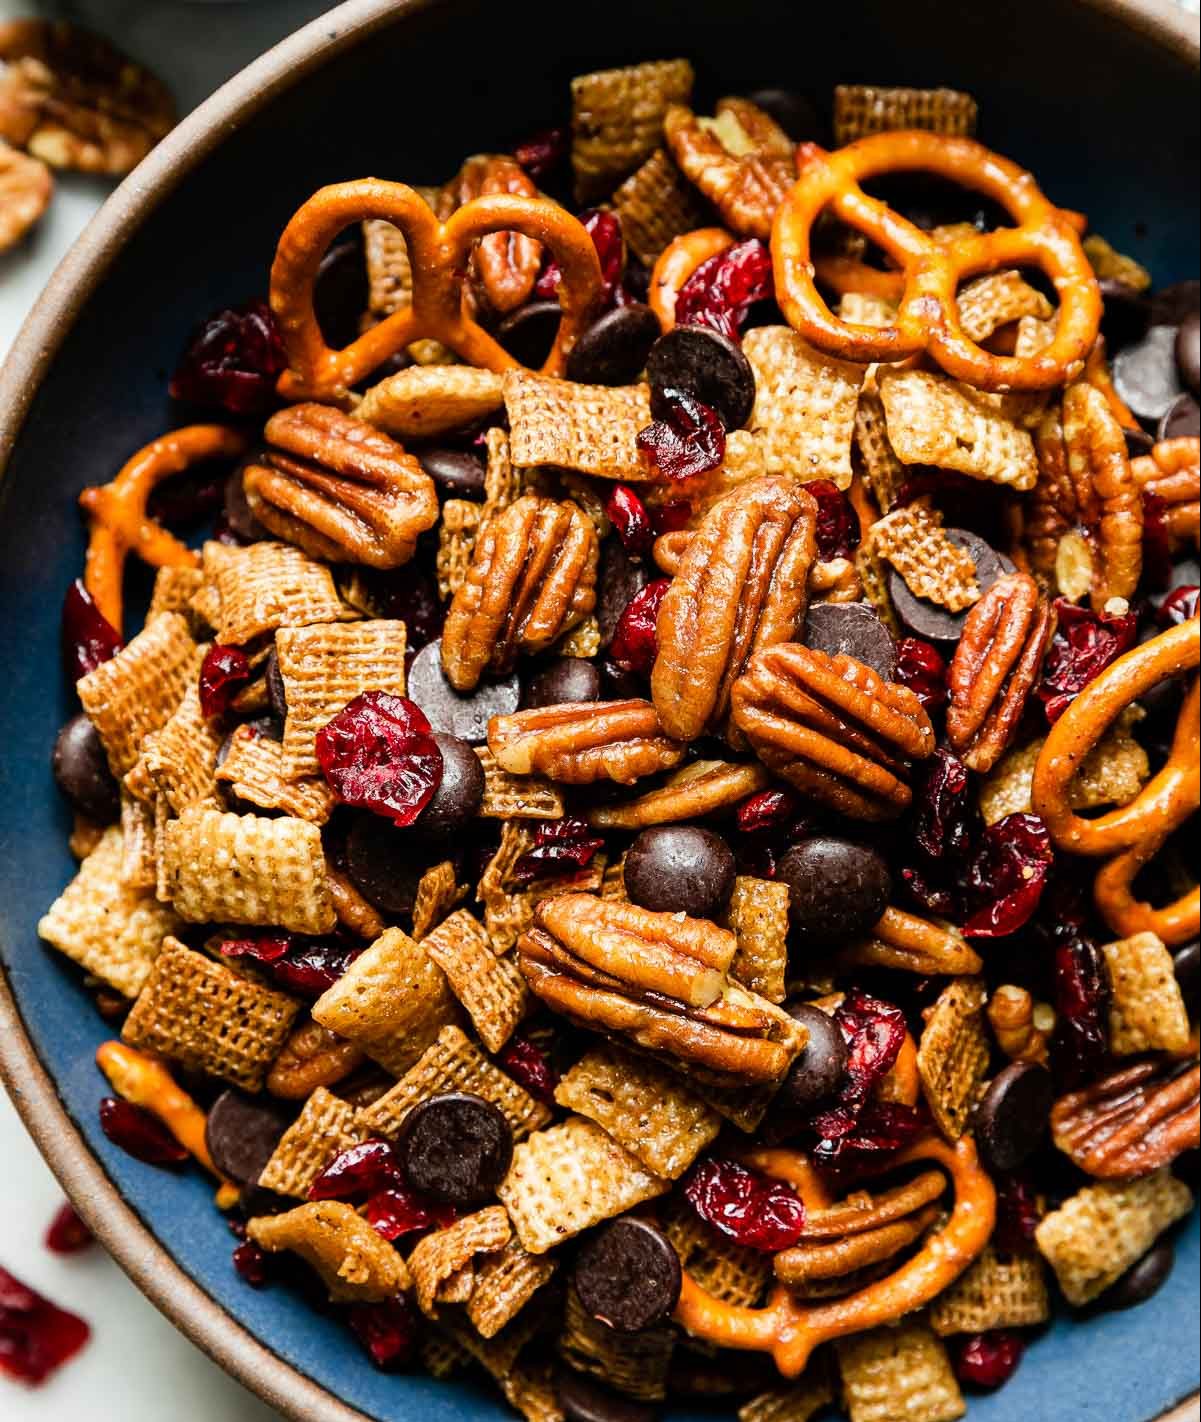 A pecan snack mix from the APPB's summer marketing.